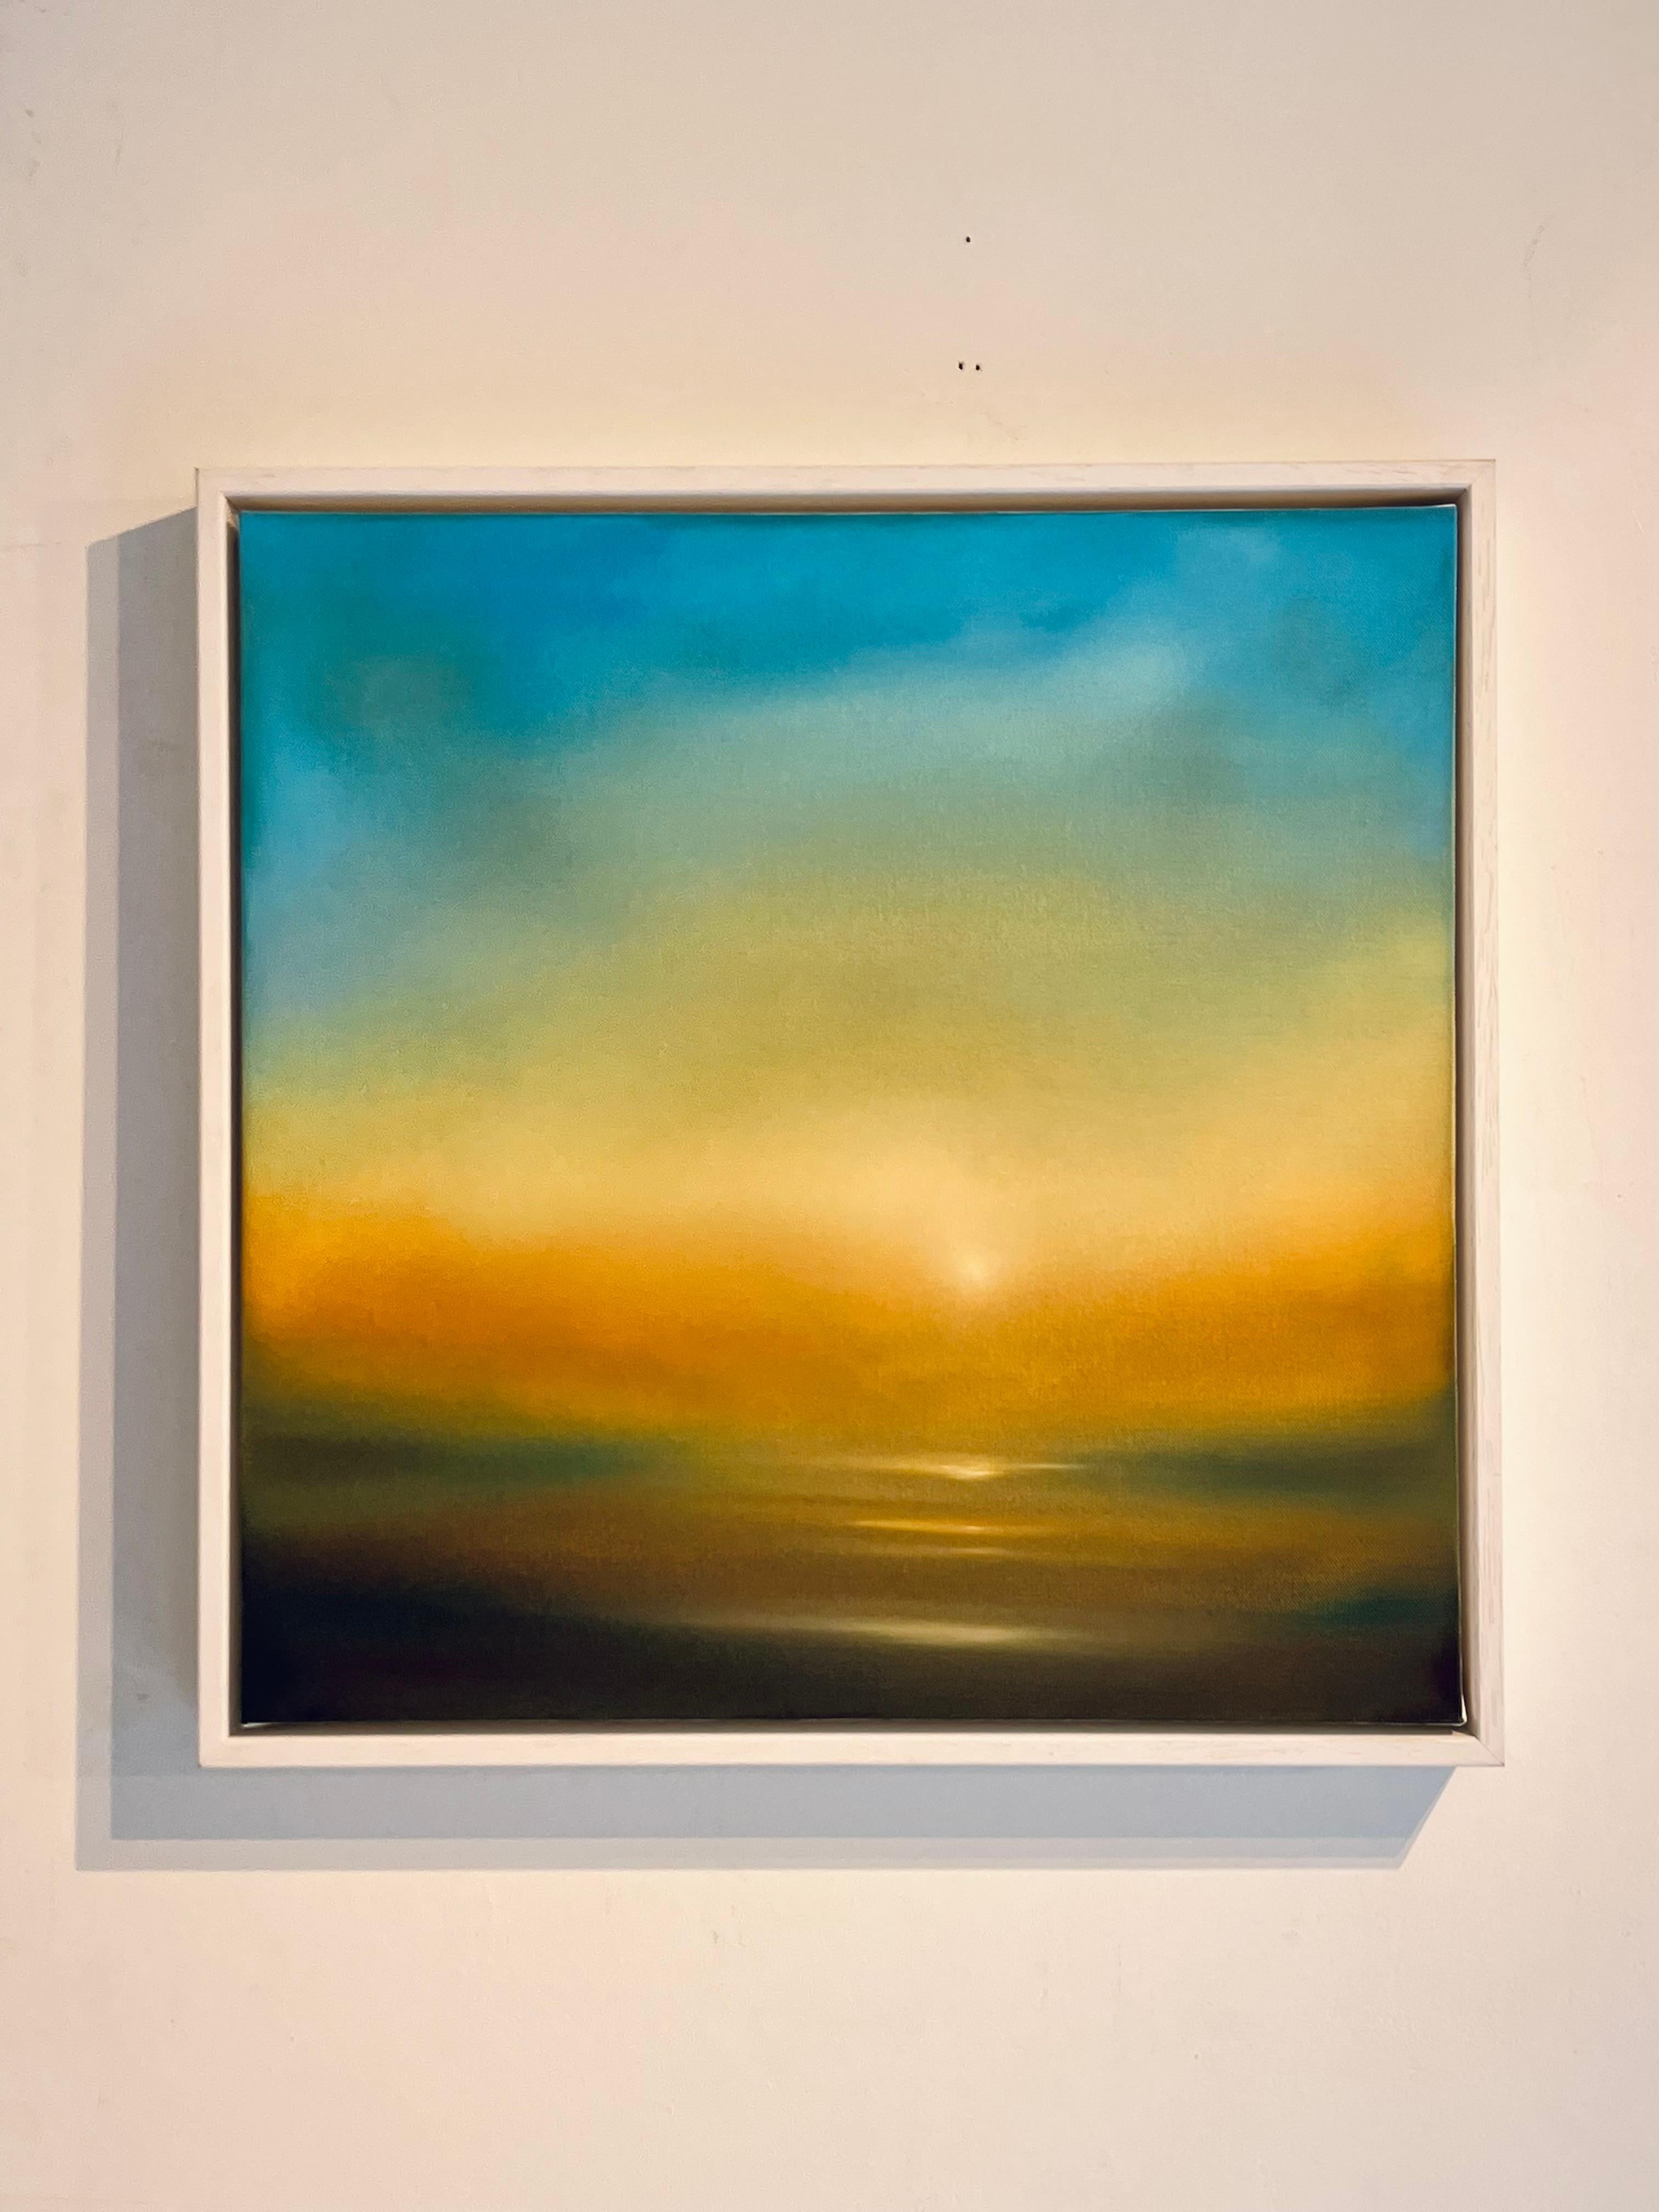 Golden Glow-original abstract seascape-ocean sunset painting-contemporary Art - Abstract Painting by Jonathan Speed